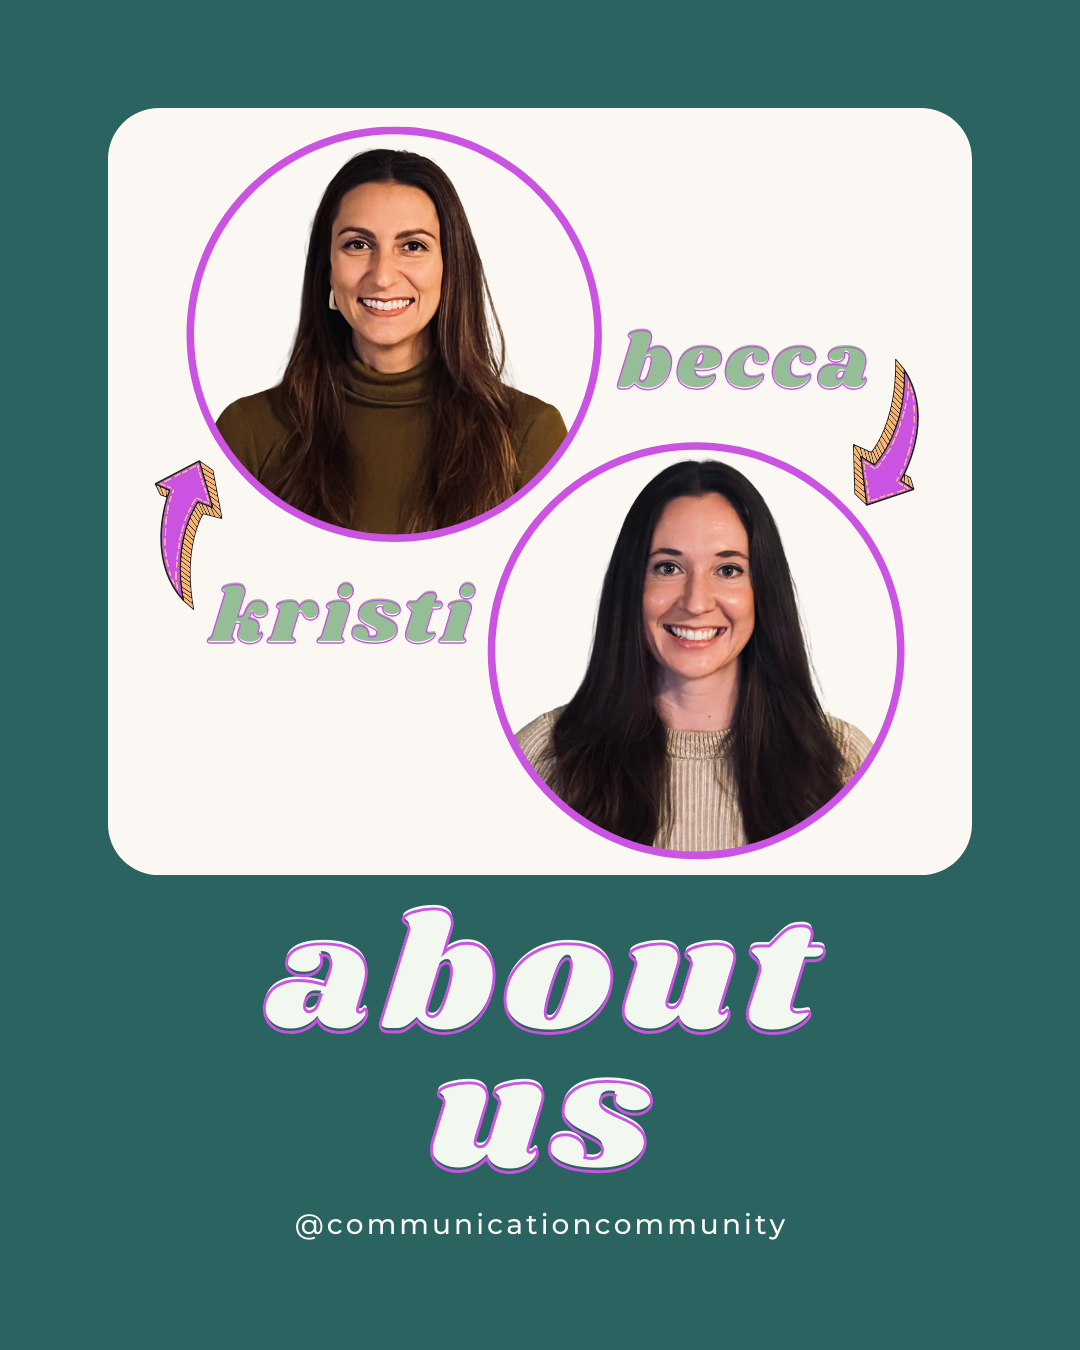 Get to know more about Communication Community co-founders and SLPs, Becca and Kristi!